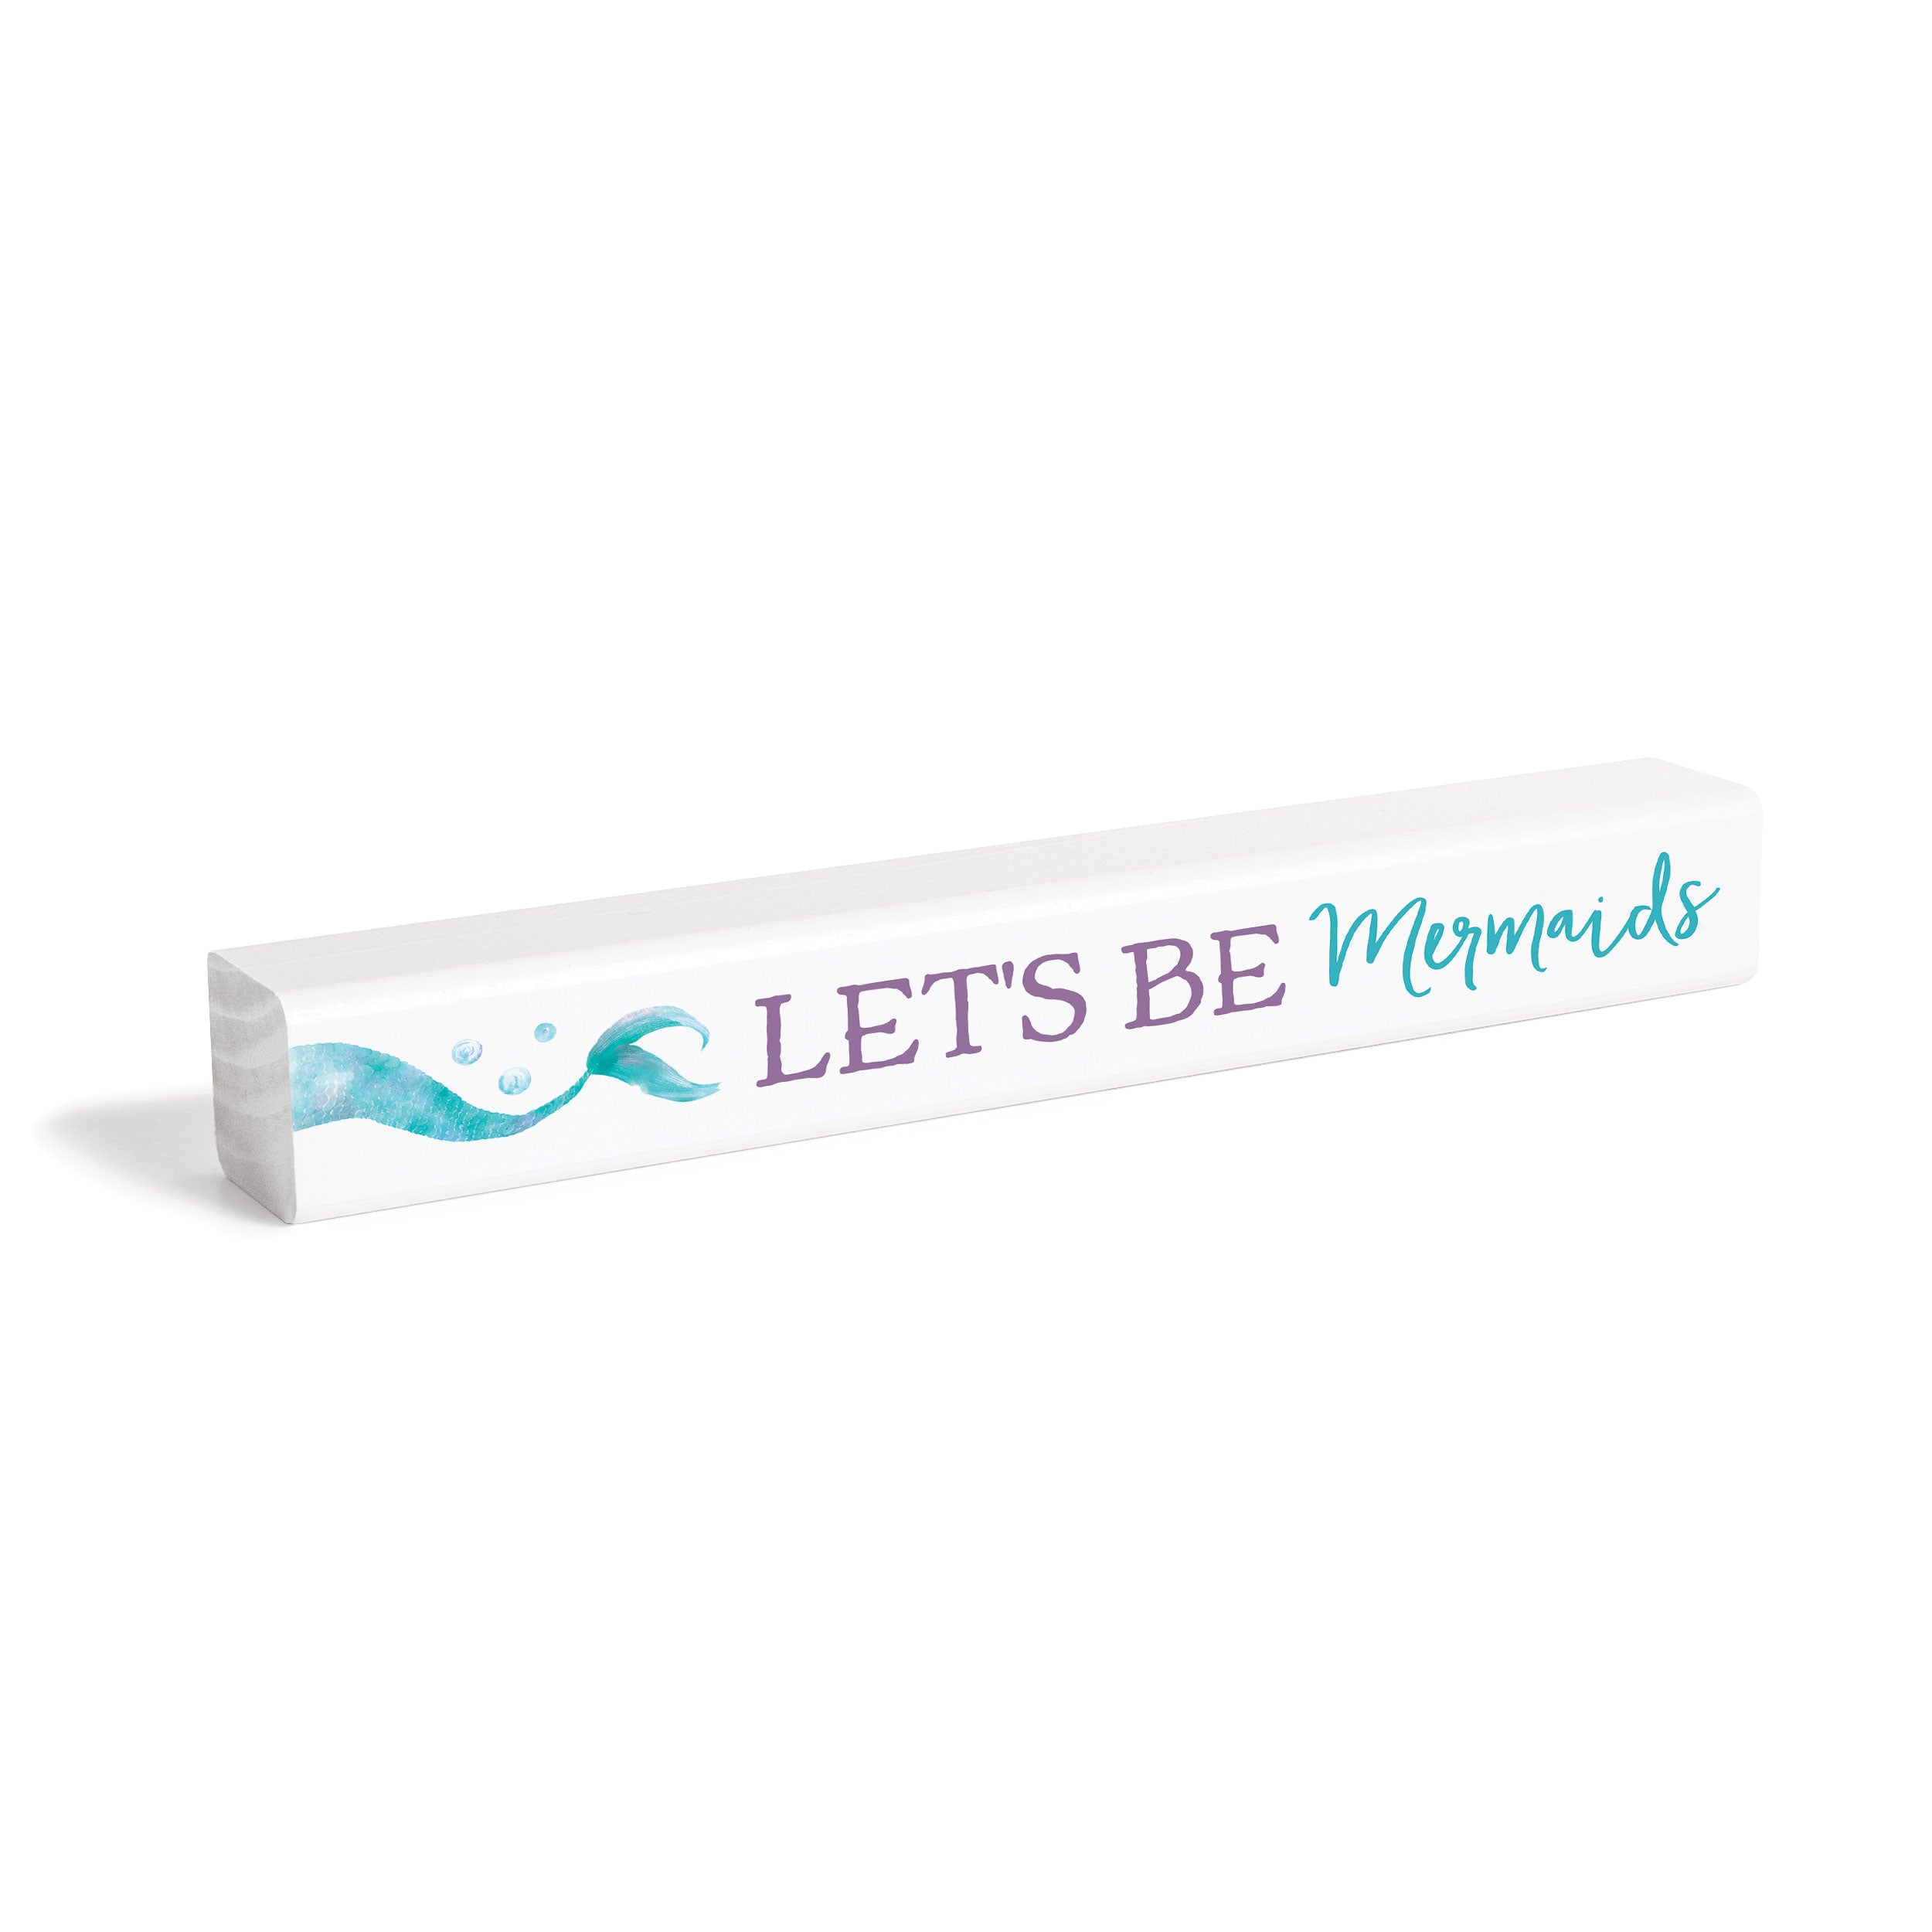 **Let's Be Mermaids Stick Sign